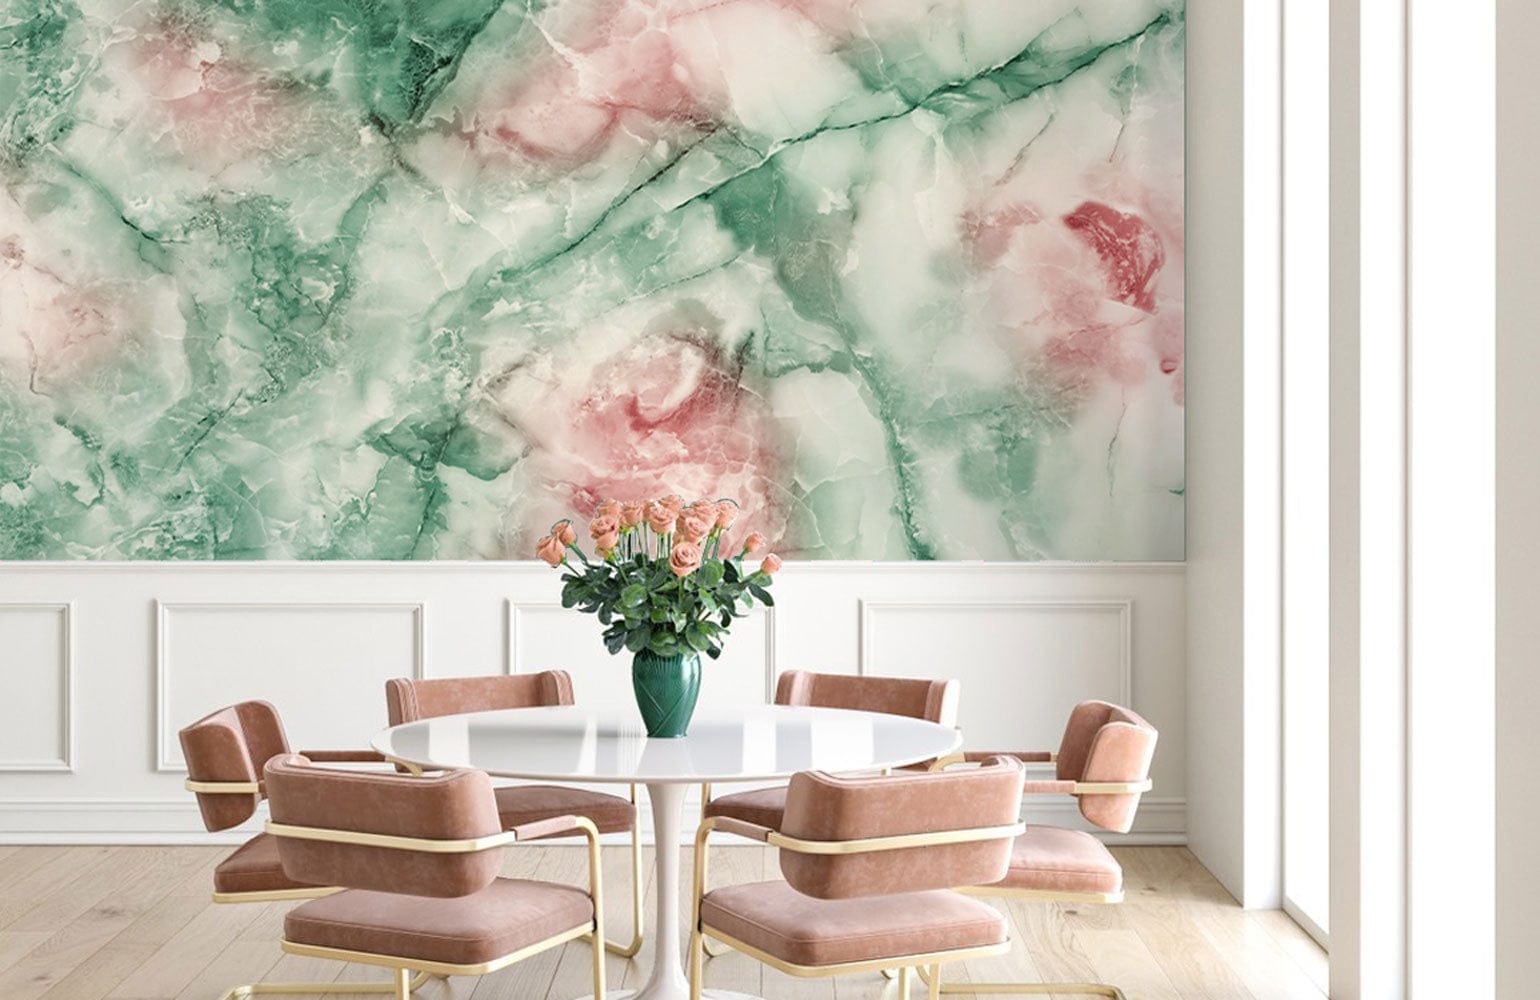 Green and Red Wisps Crystal Wallpaper Mural for the Decoration of the Dining Room